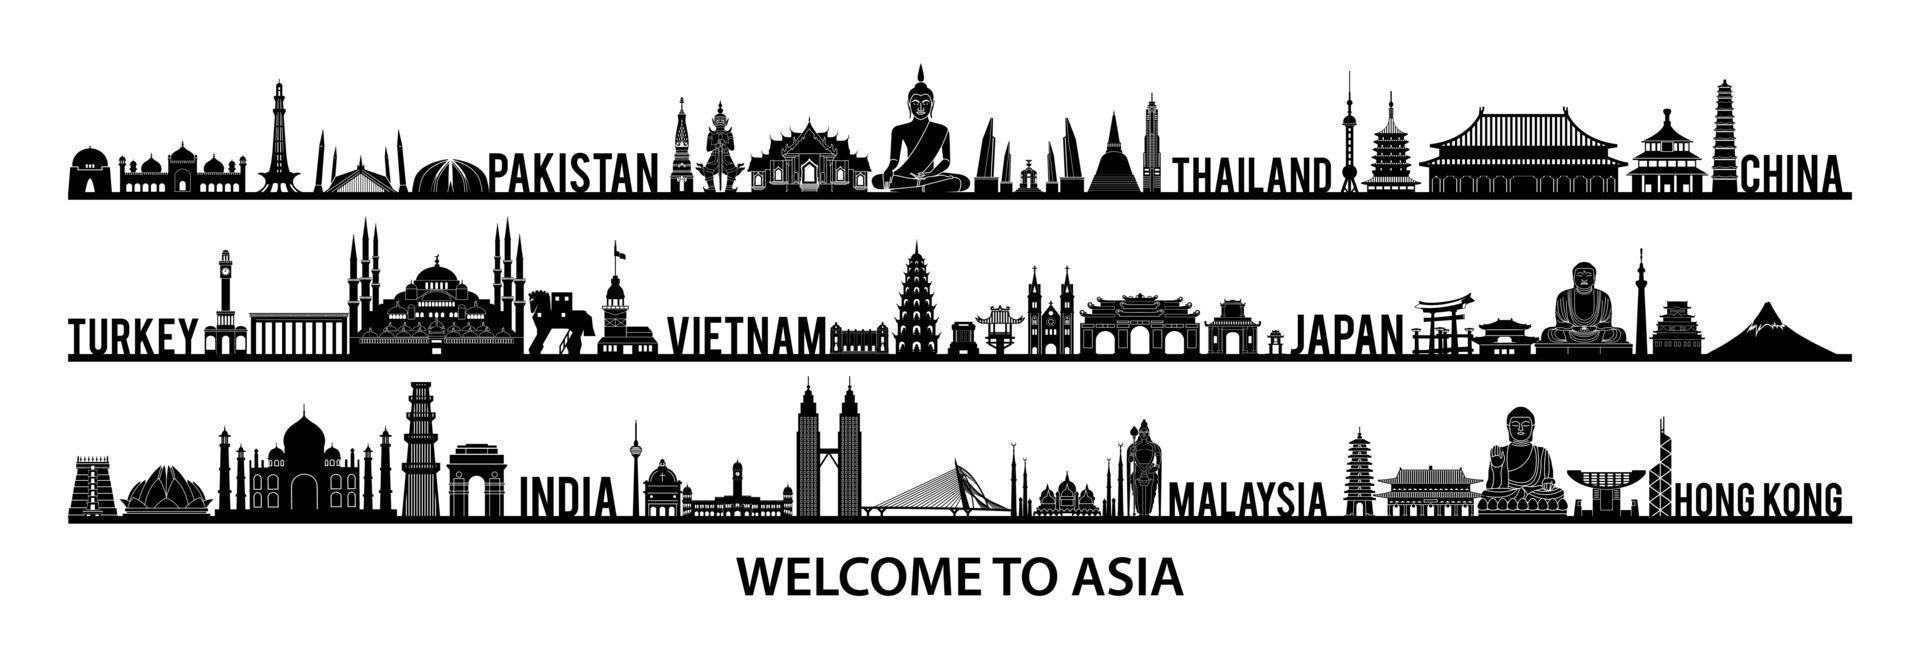 collection of famous landmarks of Asia silhouette style with black and white color vector